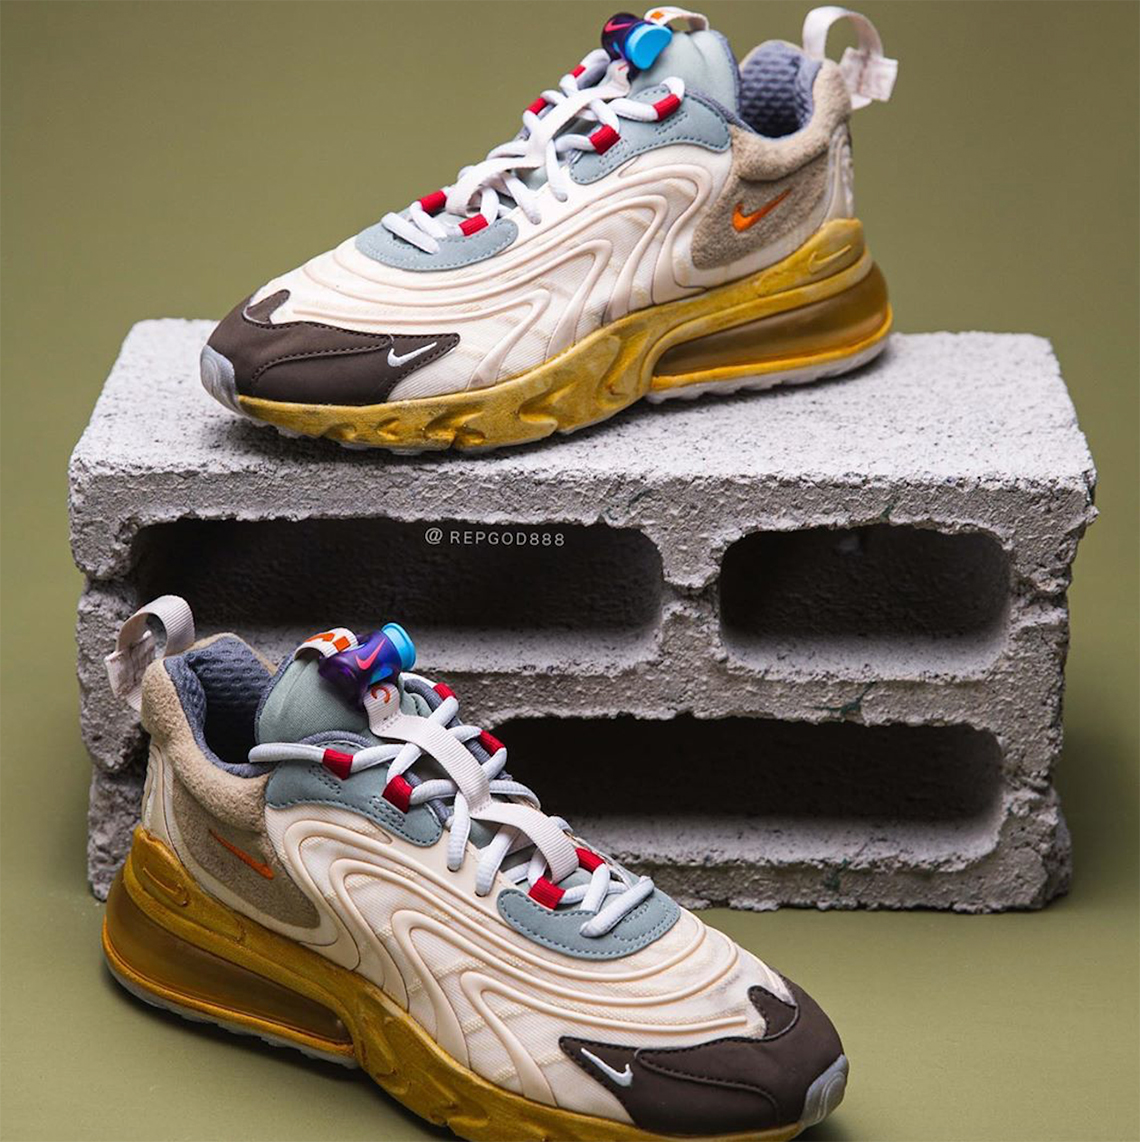 Travis Scott x Nike Air Max 270 React Set To Release In March 2020